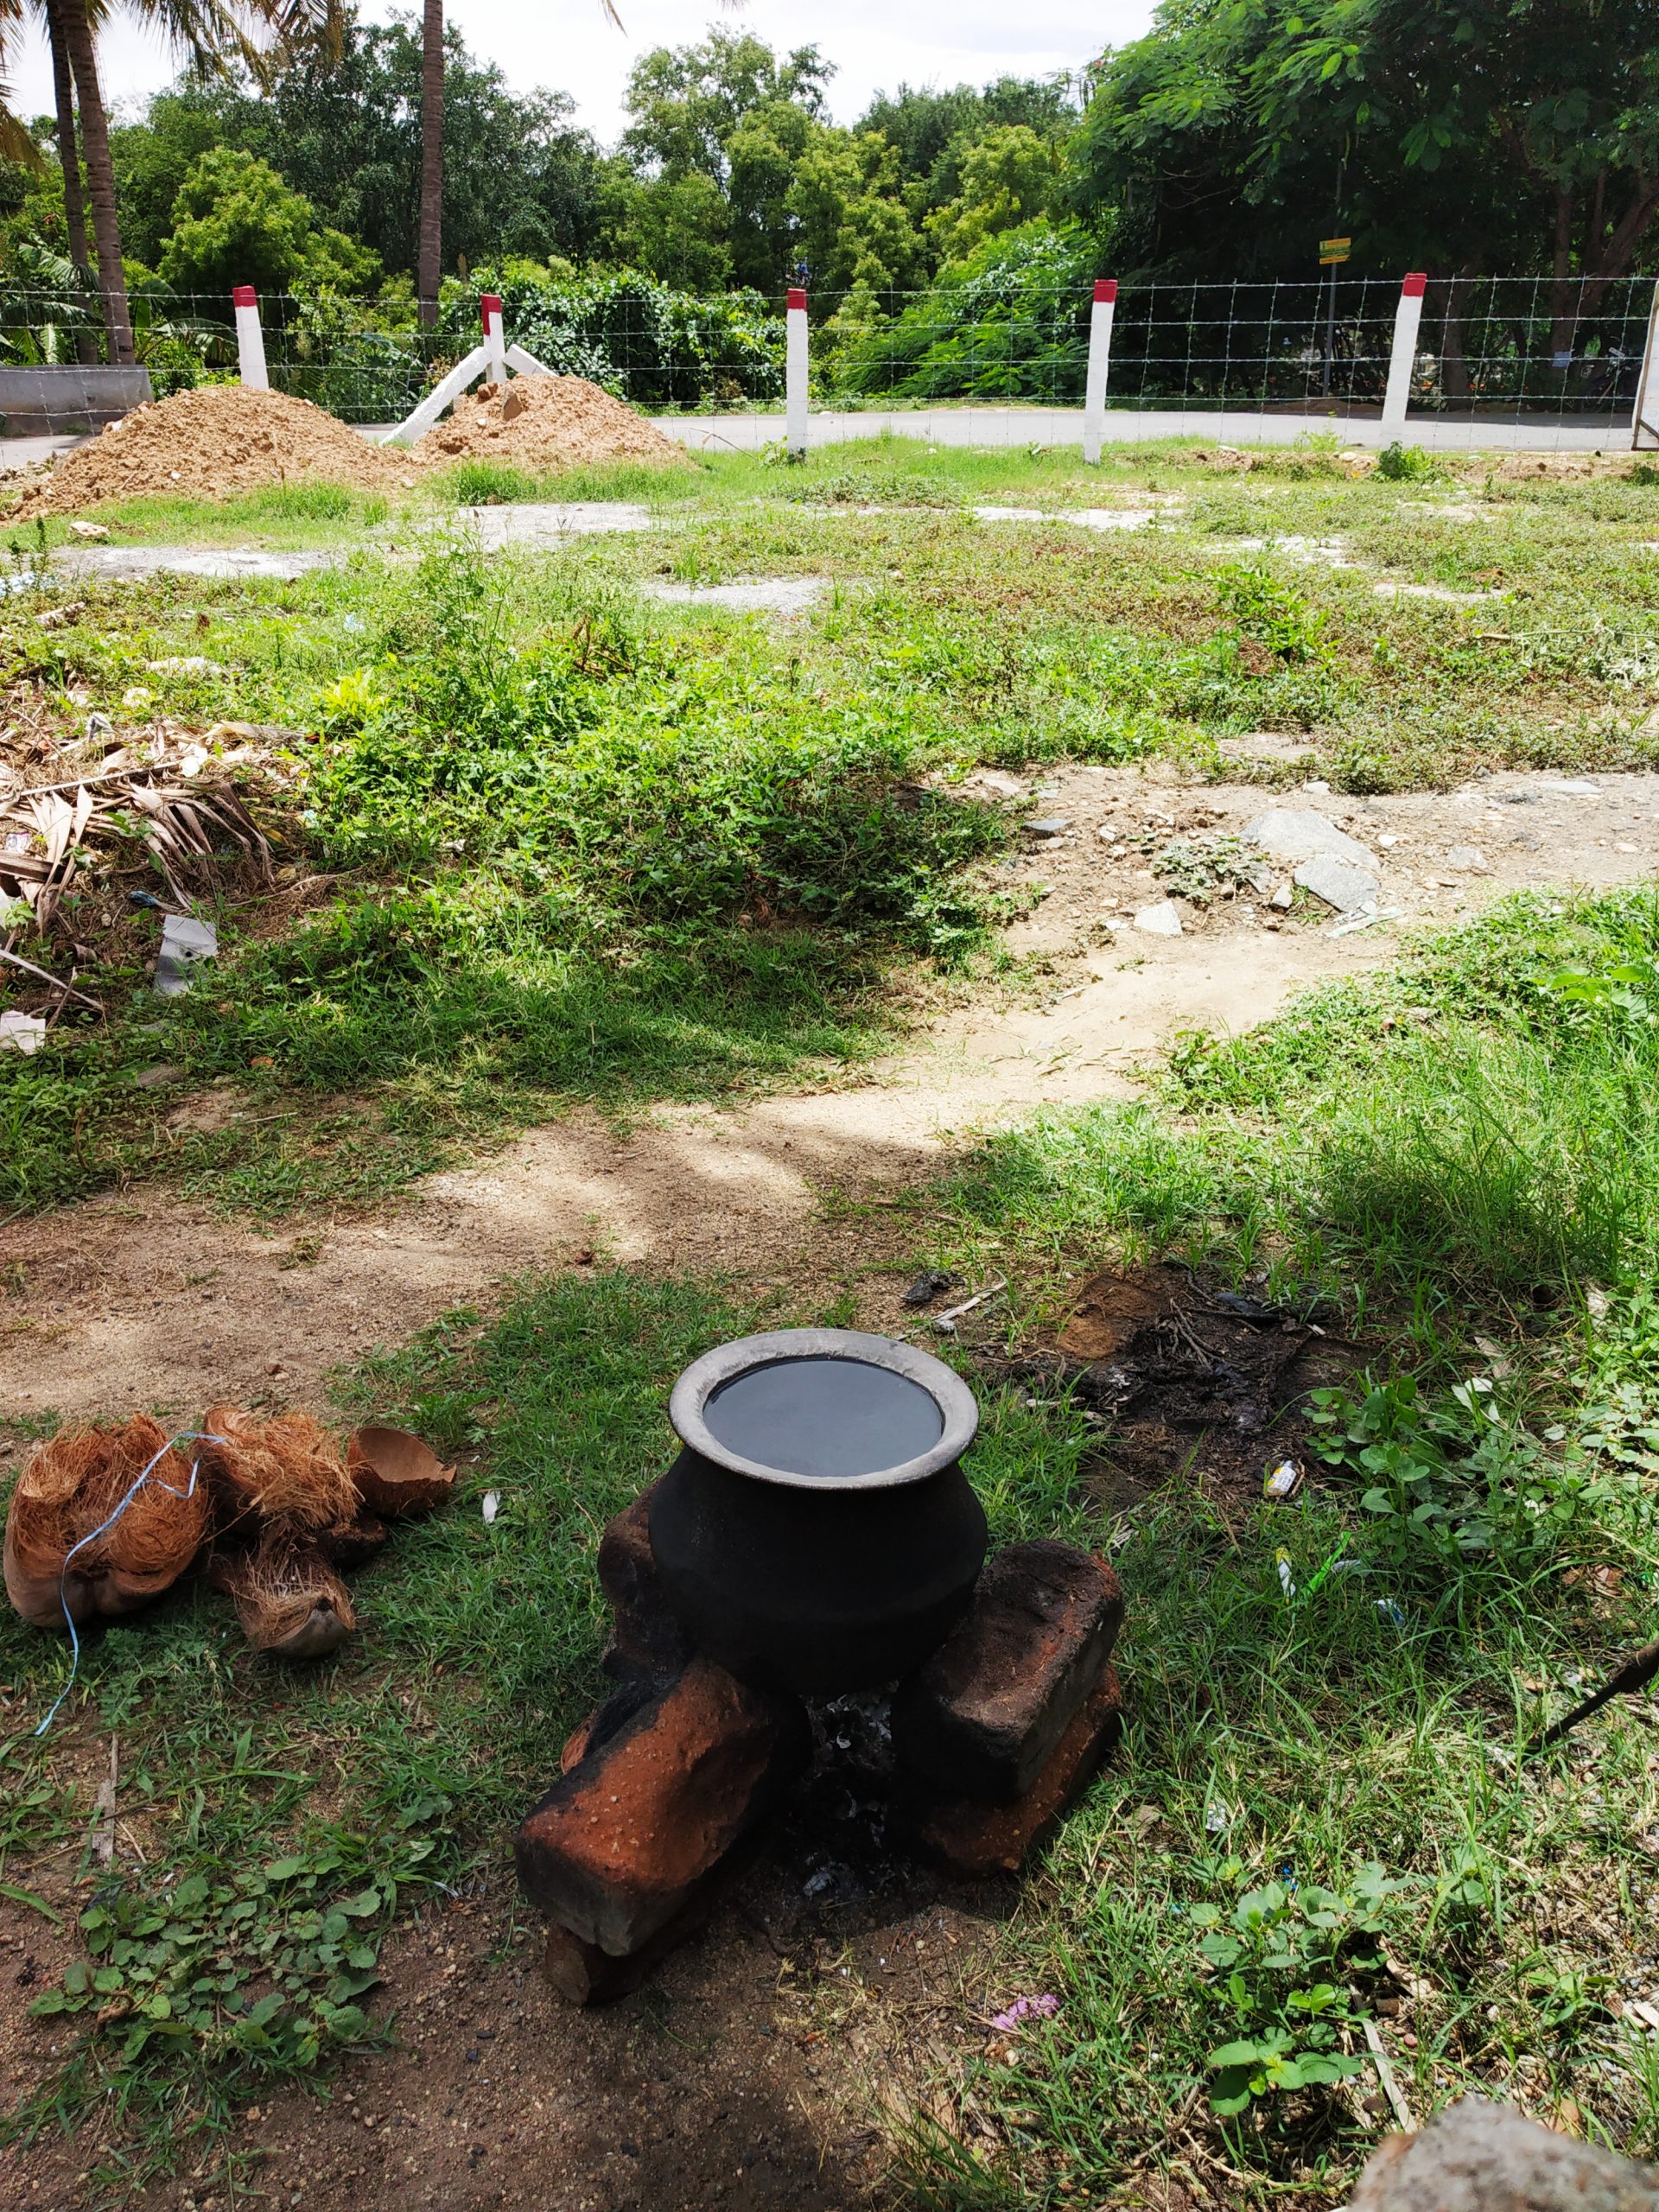 A water pot to heat